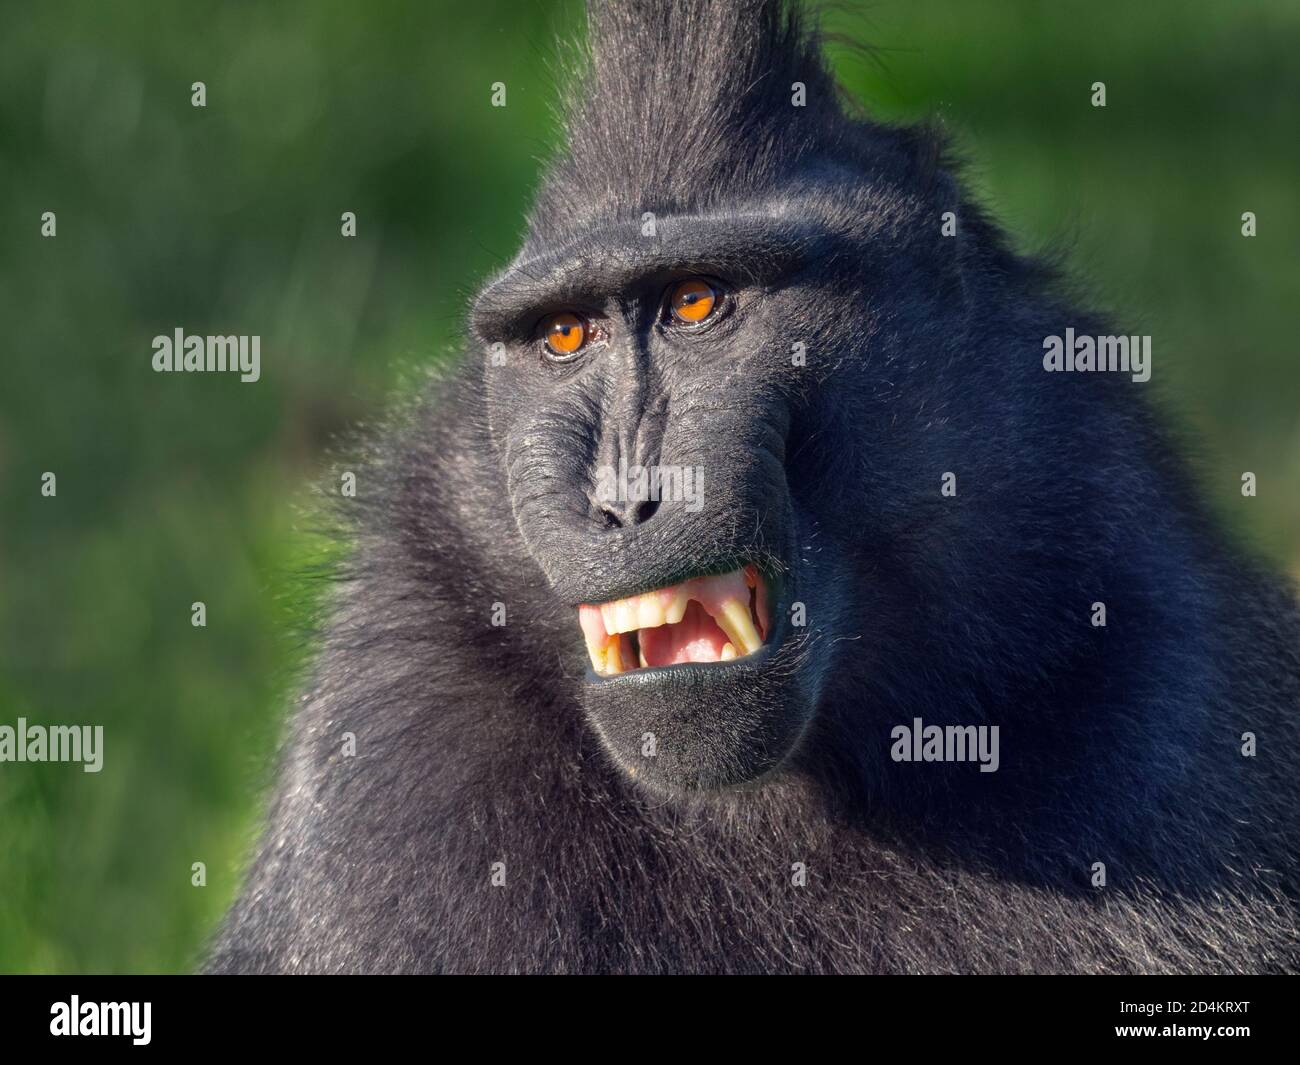 Celebes crested macaque Macaca nigra also known as the crested black macaque, Sulawesi crested macaque, or the black ape Stock Photo